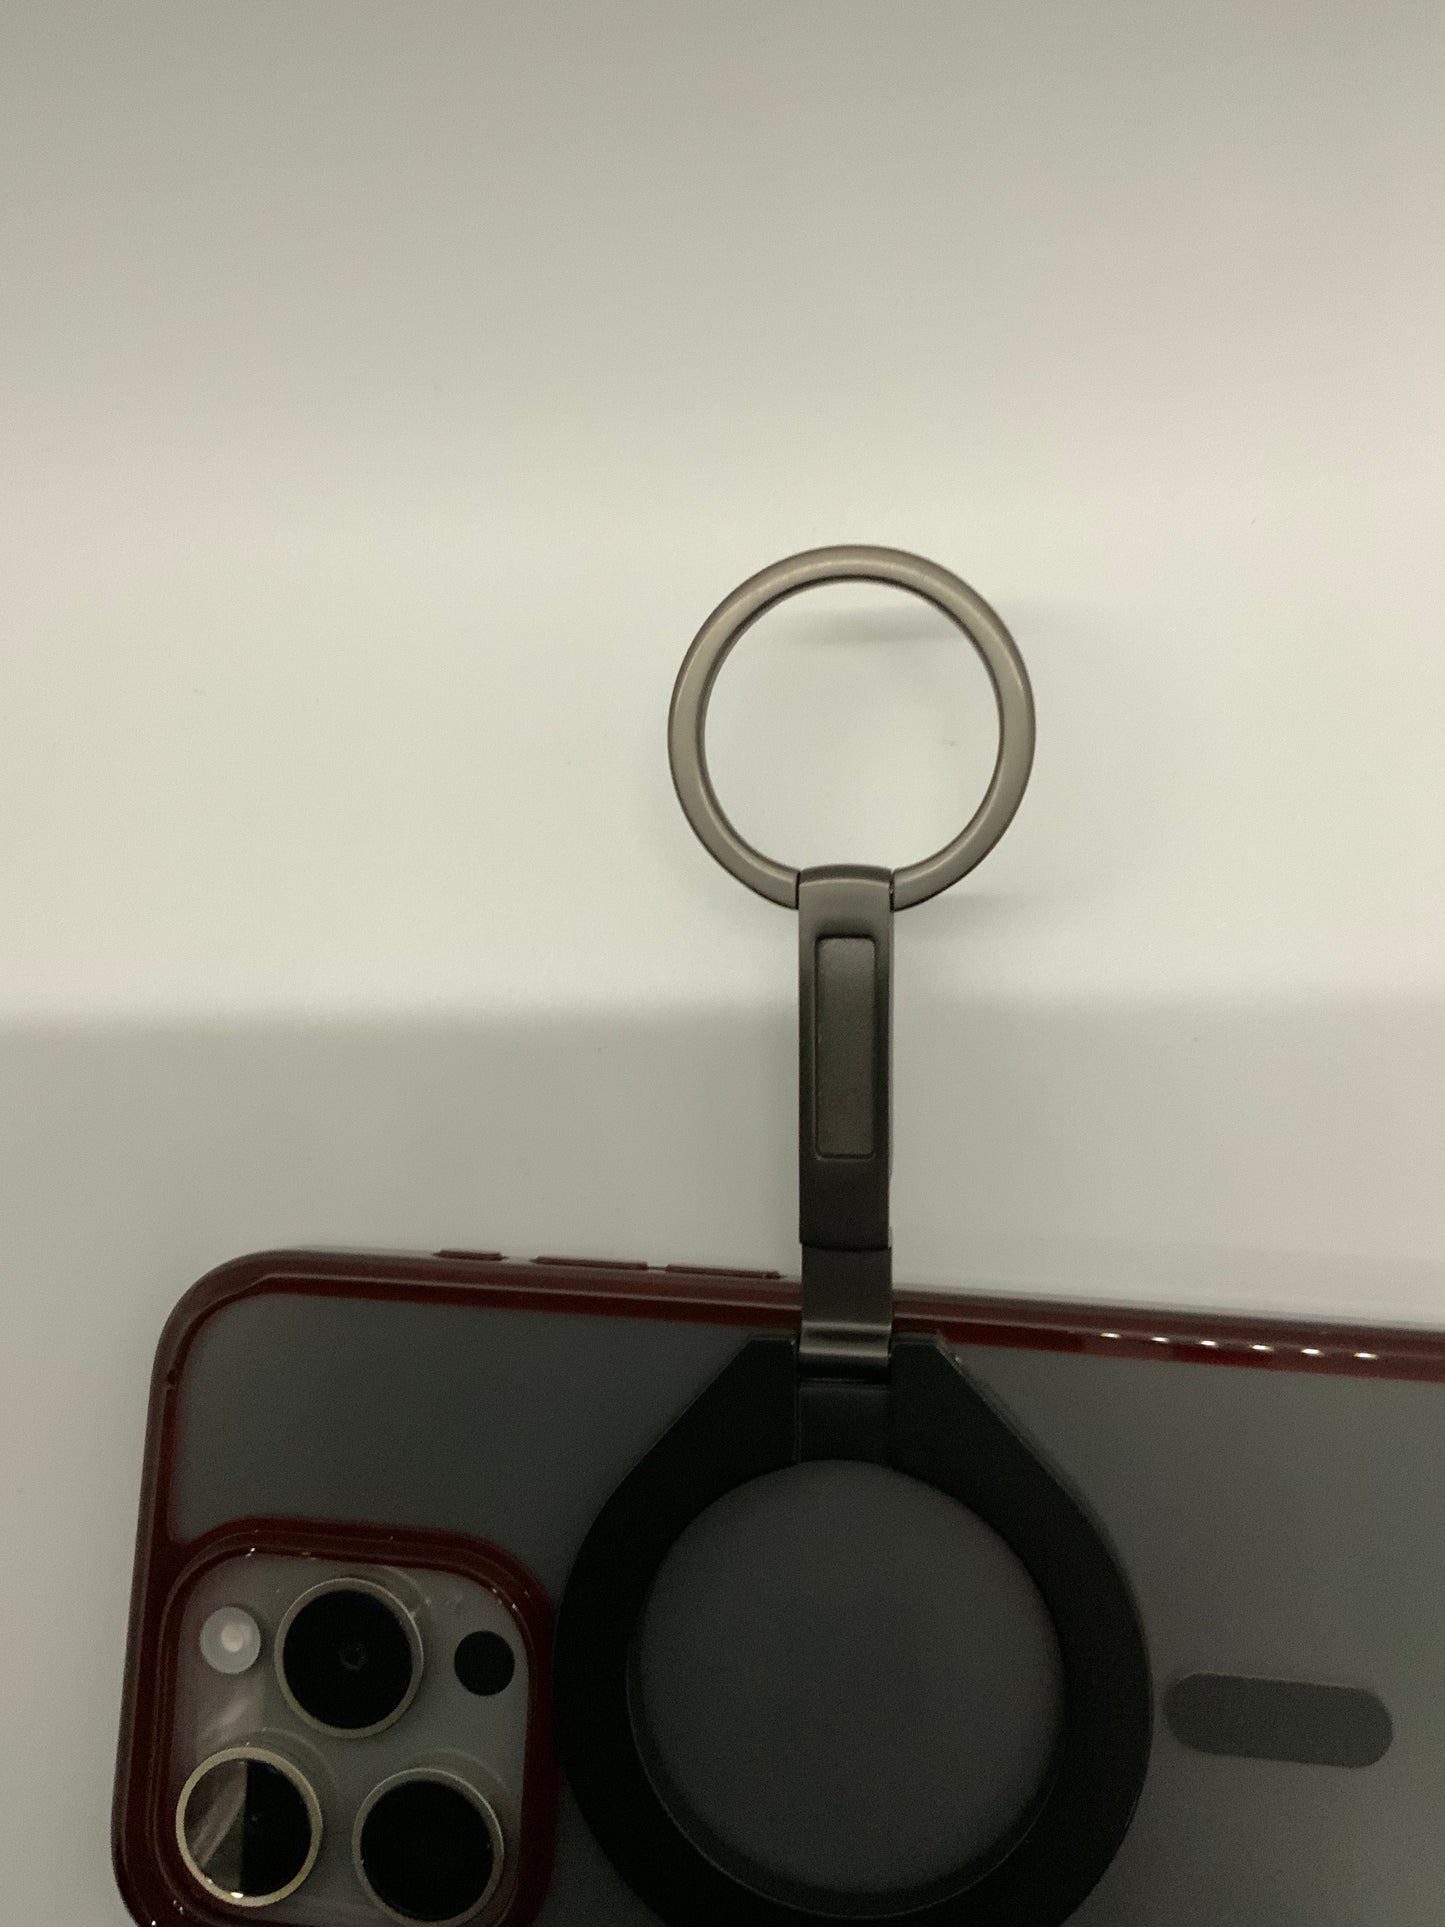 Be My AI: The picture shows a part of a smartphone with a red case and a ring holder attached to it. The smartphone case has a cut-out for the camera, which has three lenses and a flash. The ring holder is attached to the back of the smartphone case. It has a metal ring and a base. The ring is in the upright position and can be used to hold the phone securely or as a stand. The background is plain and light-colored.